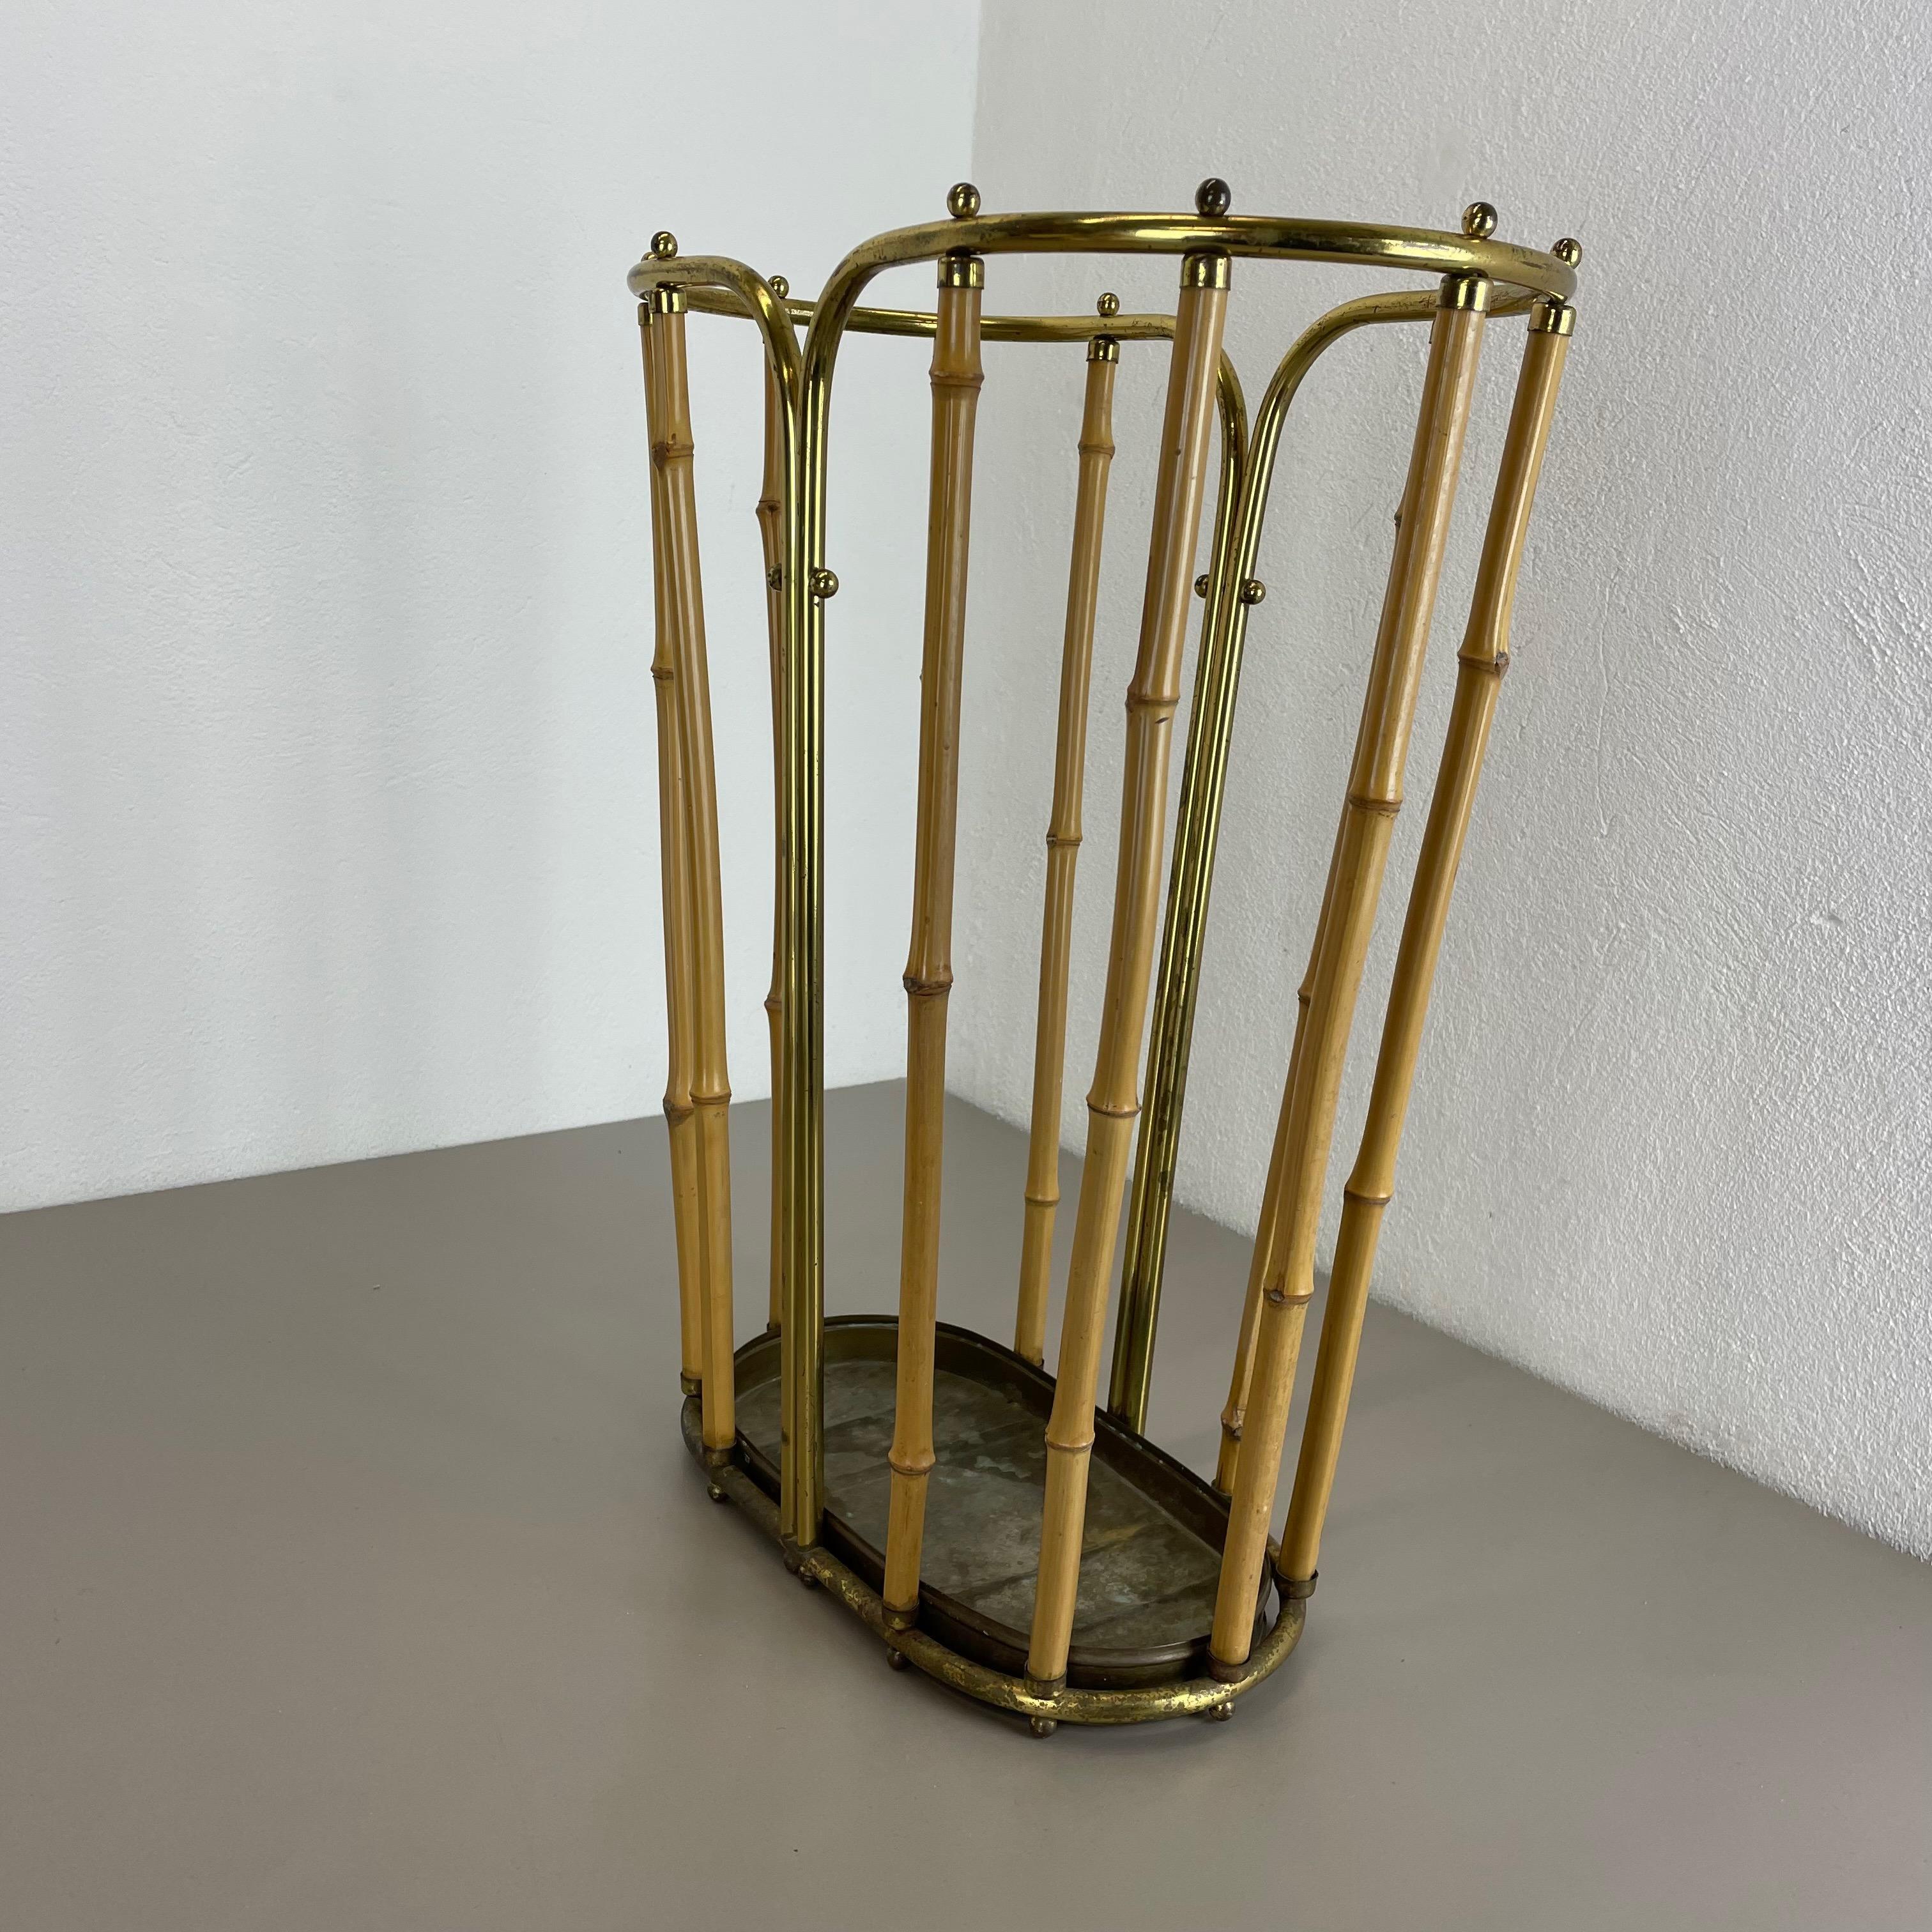 Hollywood Regency Auböck Style Brass Bamboo Umbrella Stand, Austria, 1950s For Sale 4